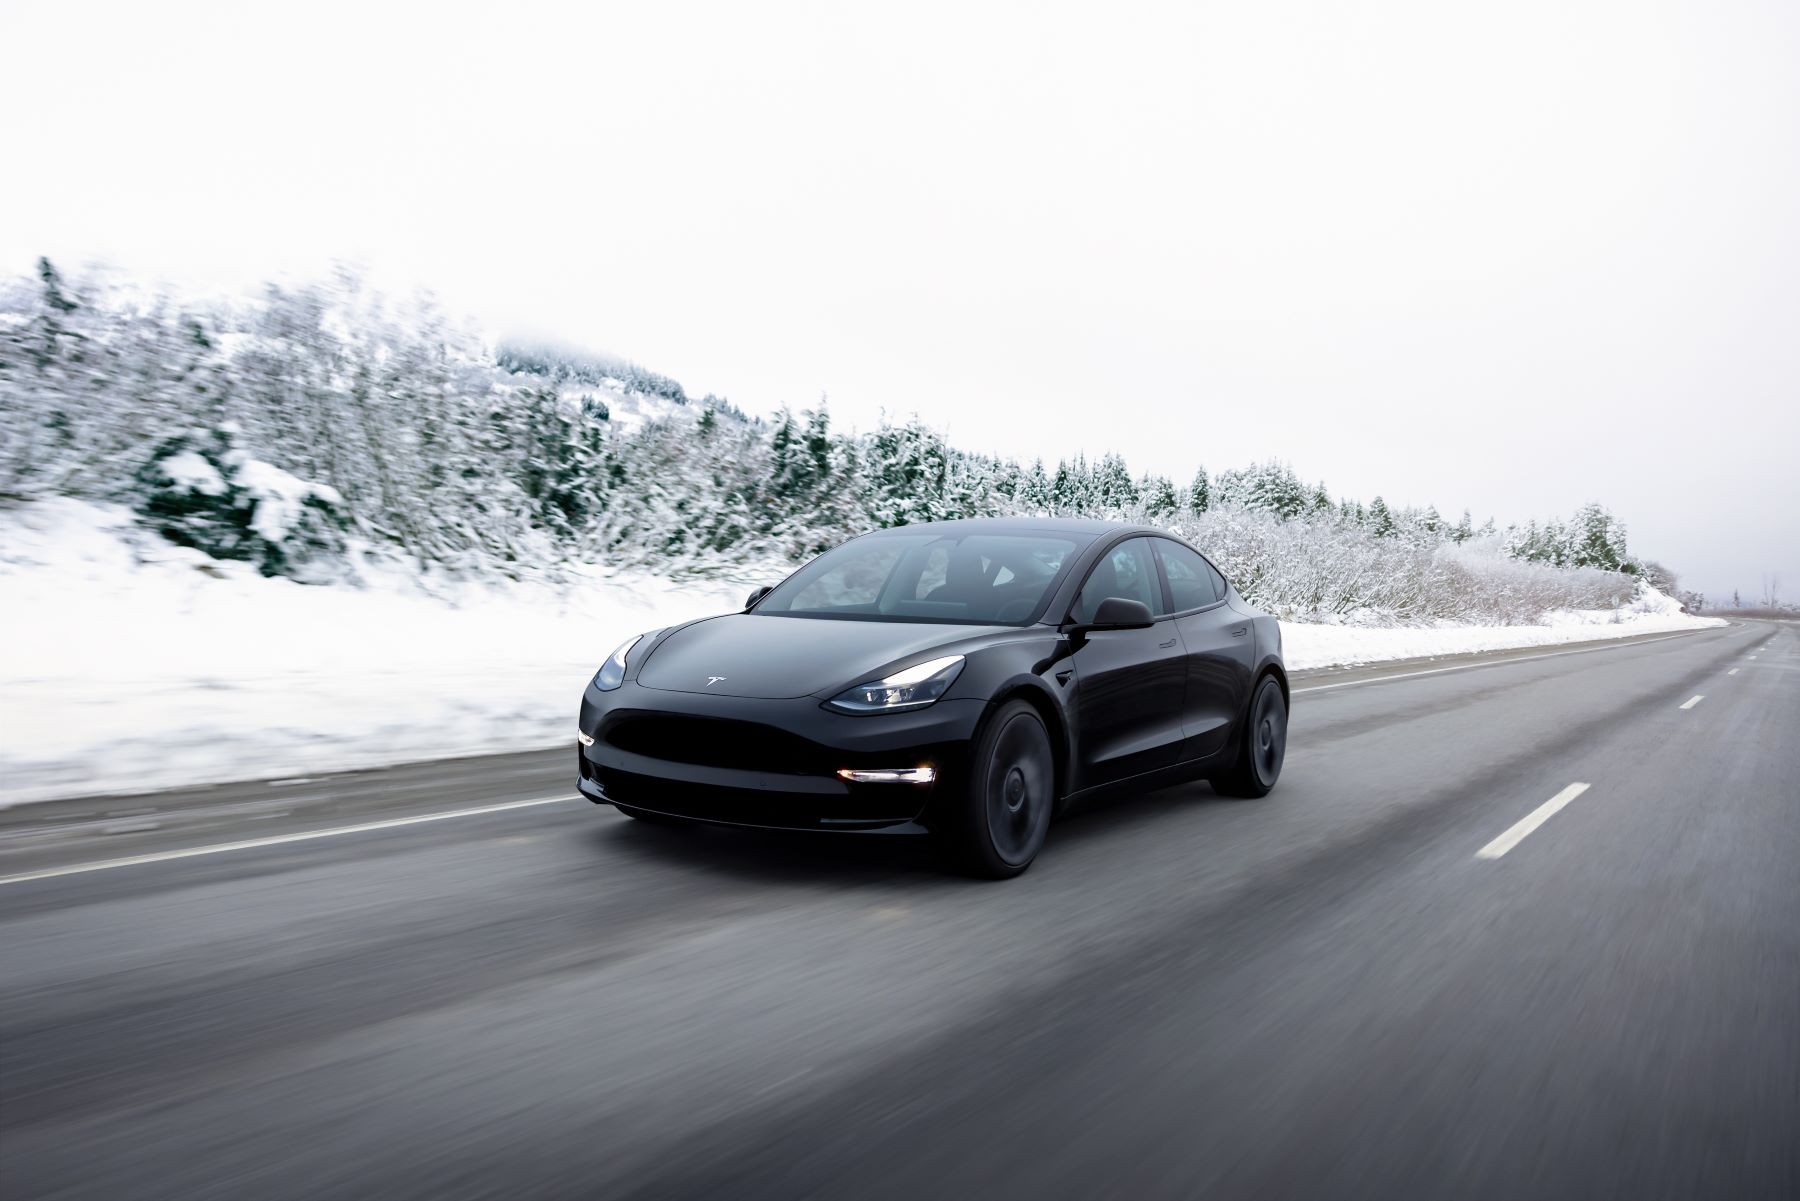 The Tesla Model 3 all-electric luxury sedan driving on a highway surrounded by winter trees